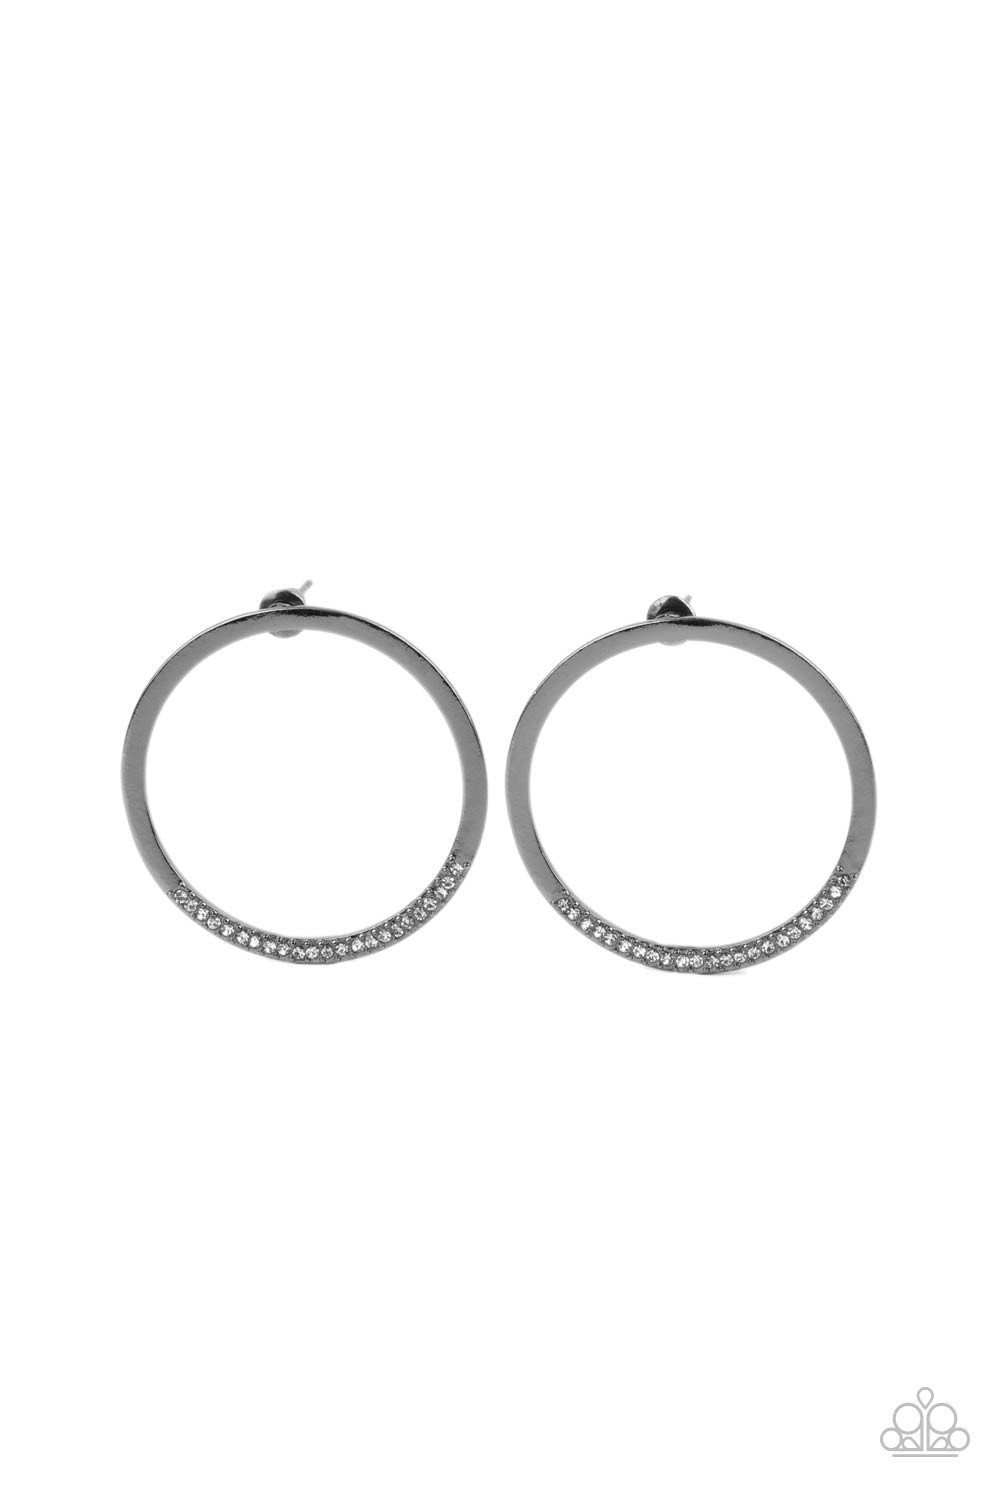 Spot On Opulence - Black - Gunmetal Shimmer Earrings - Paparazzi Accessories - As if dipped in glitter, the bottom of a flat gunmetal hoop is encrusted in dainty white rhinestones for a classic shimmer. Earring attaches to a standard post fitting.